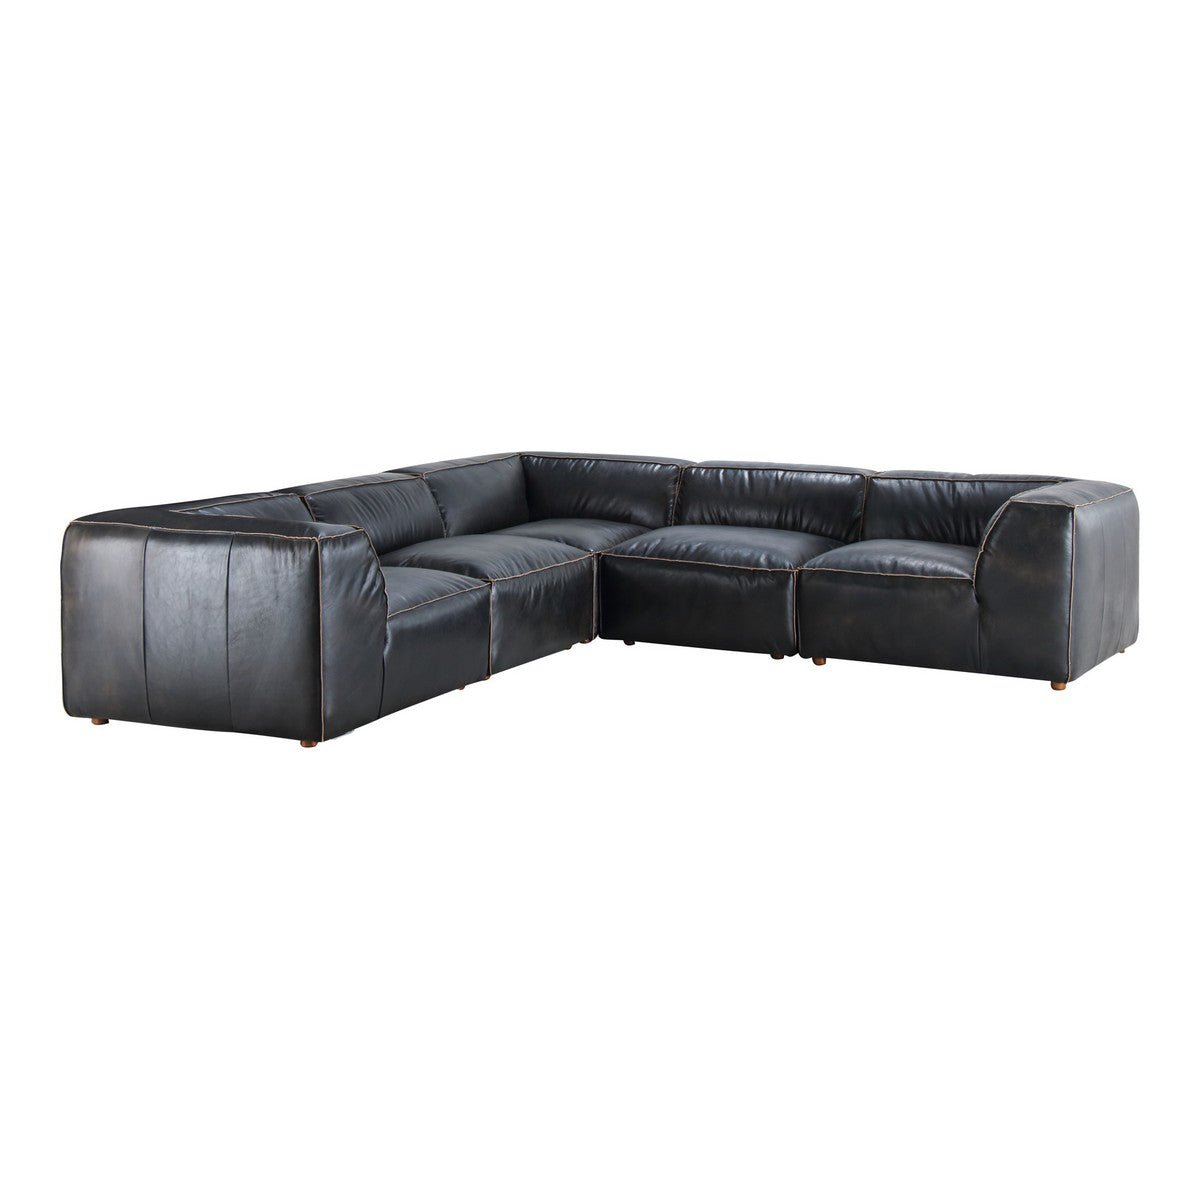 Moe's Home Collection Luxe Classic L Modular Sectional Antique Black - QN-1025-01